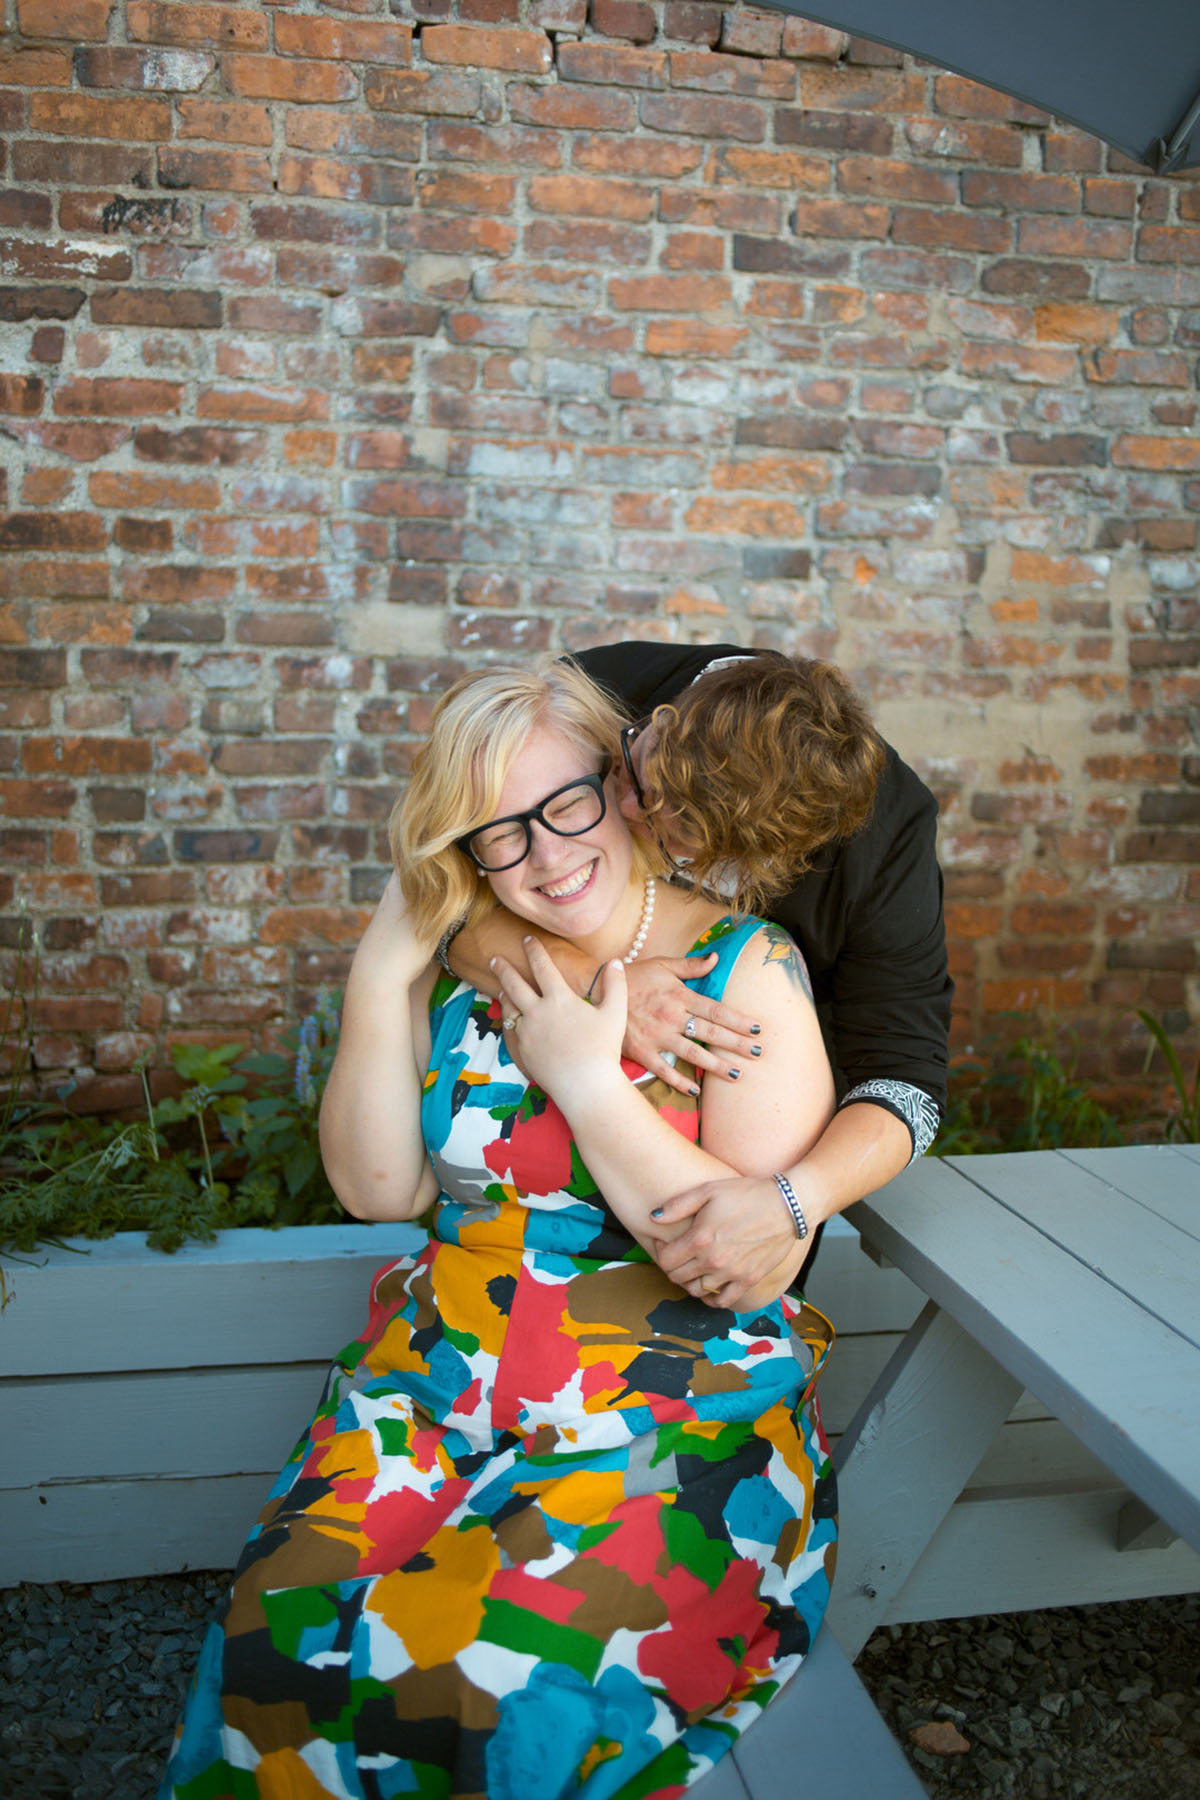 Cozy courthouse wedding with coffeehouse reception two brides colorful Modcloth dress glasses black blazer